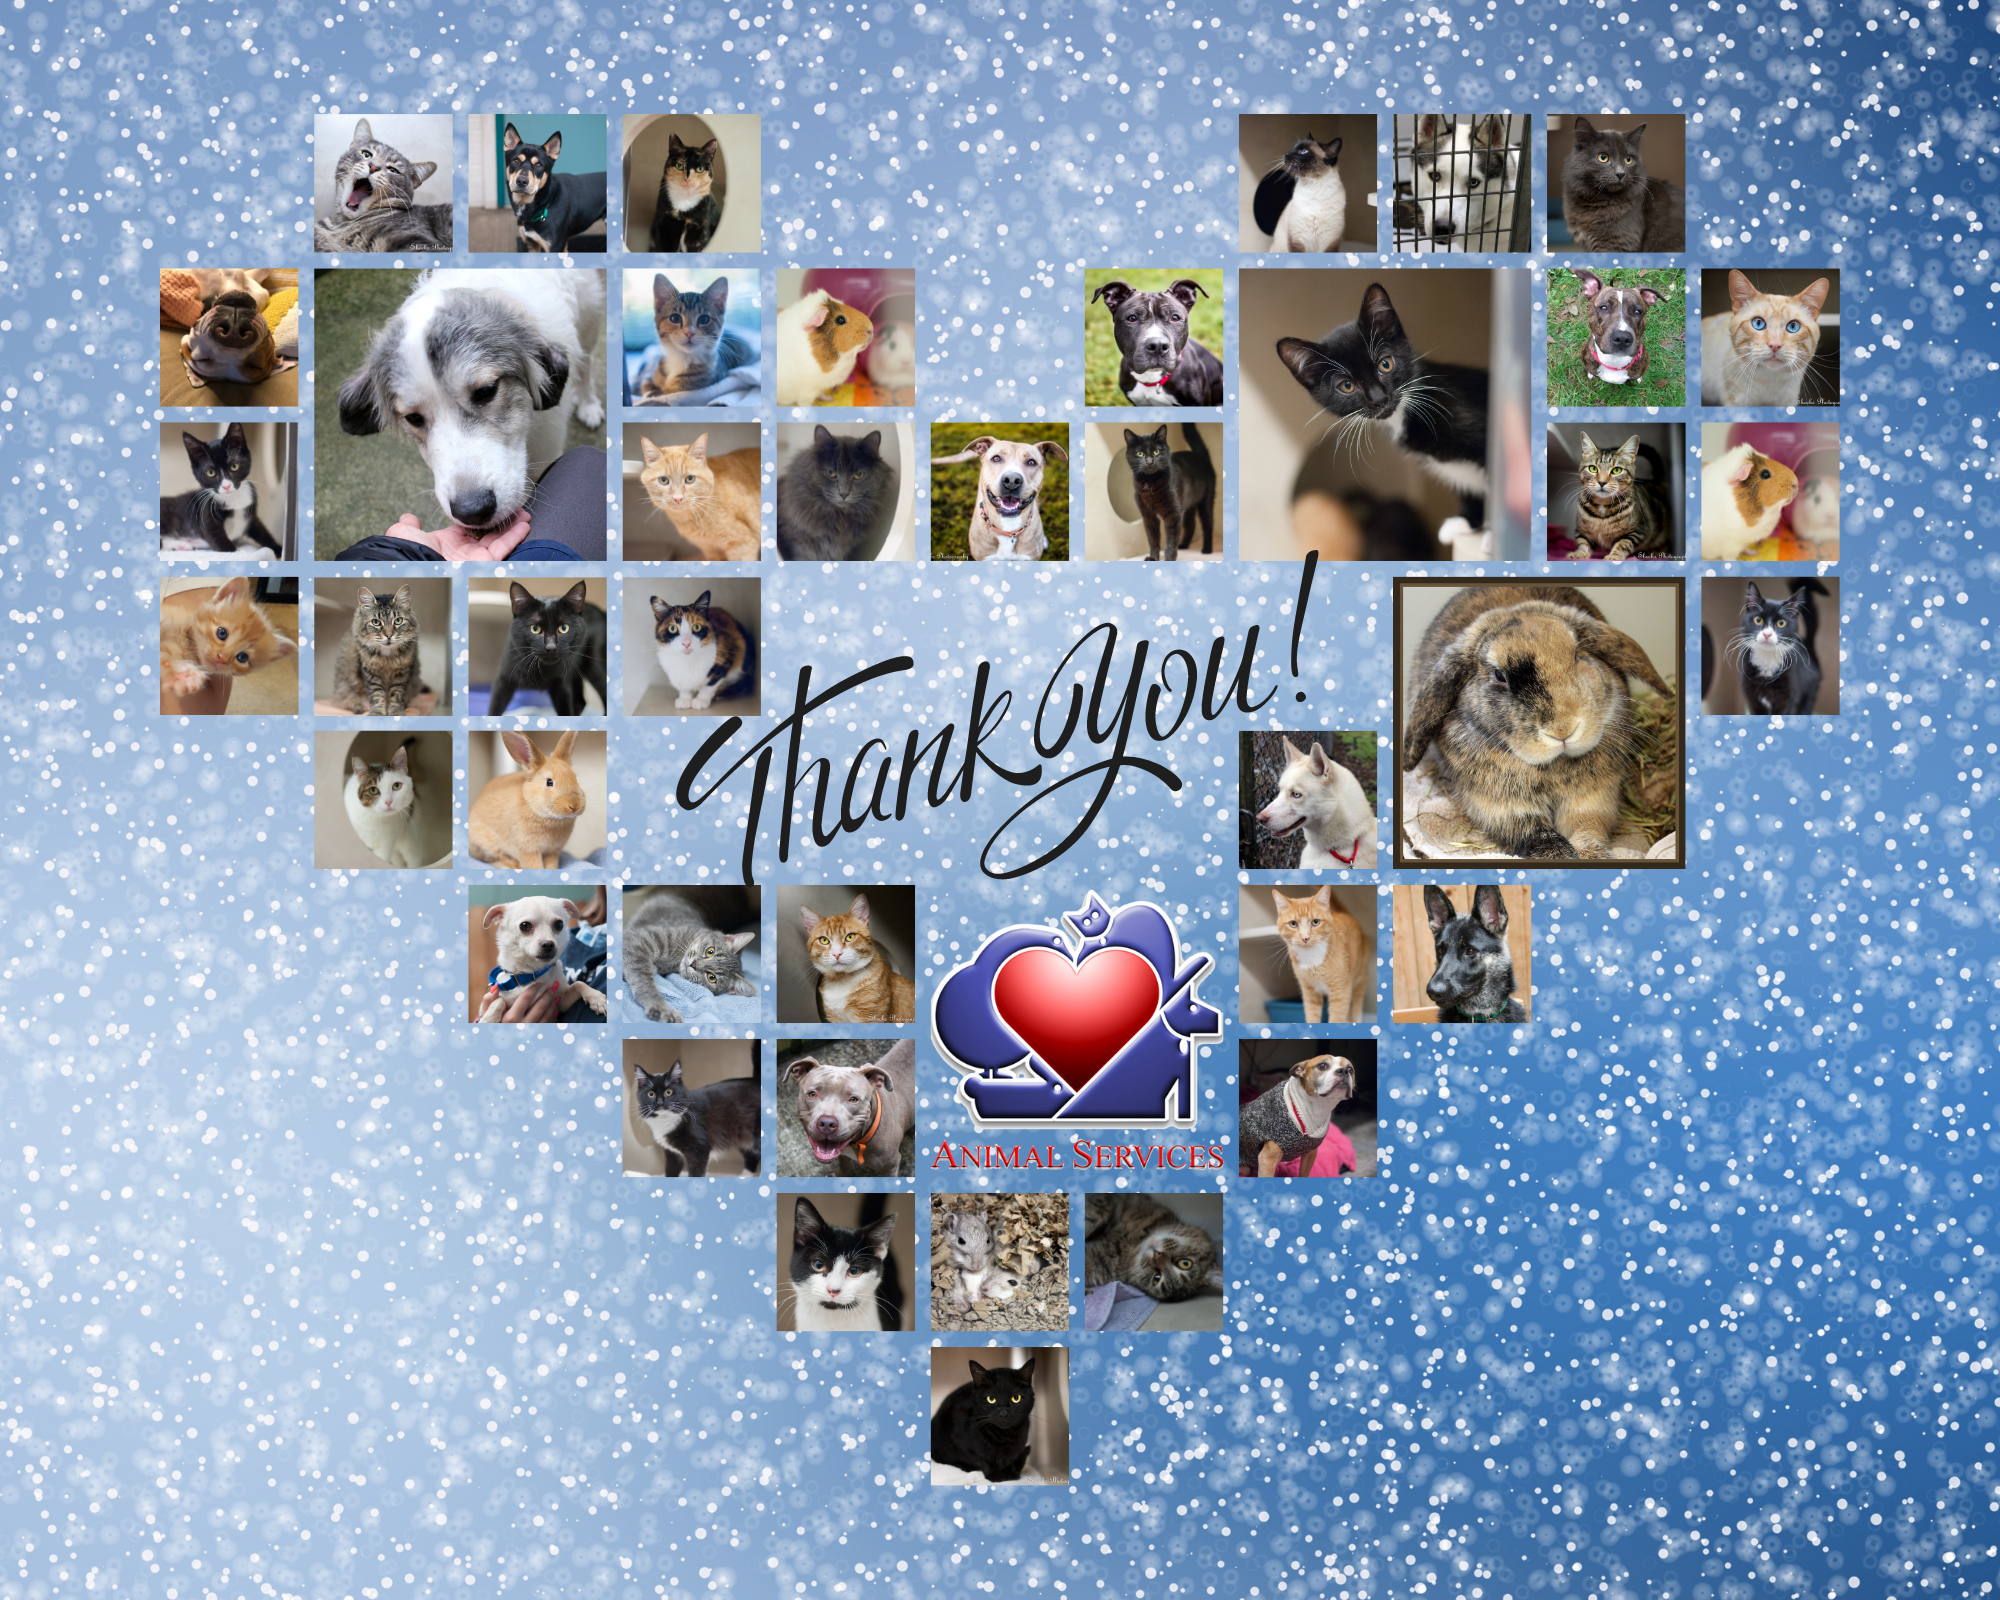 Thank You - Joint Animal Services